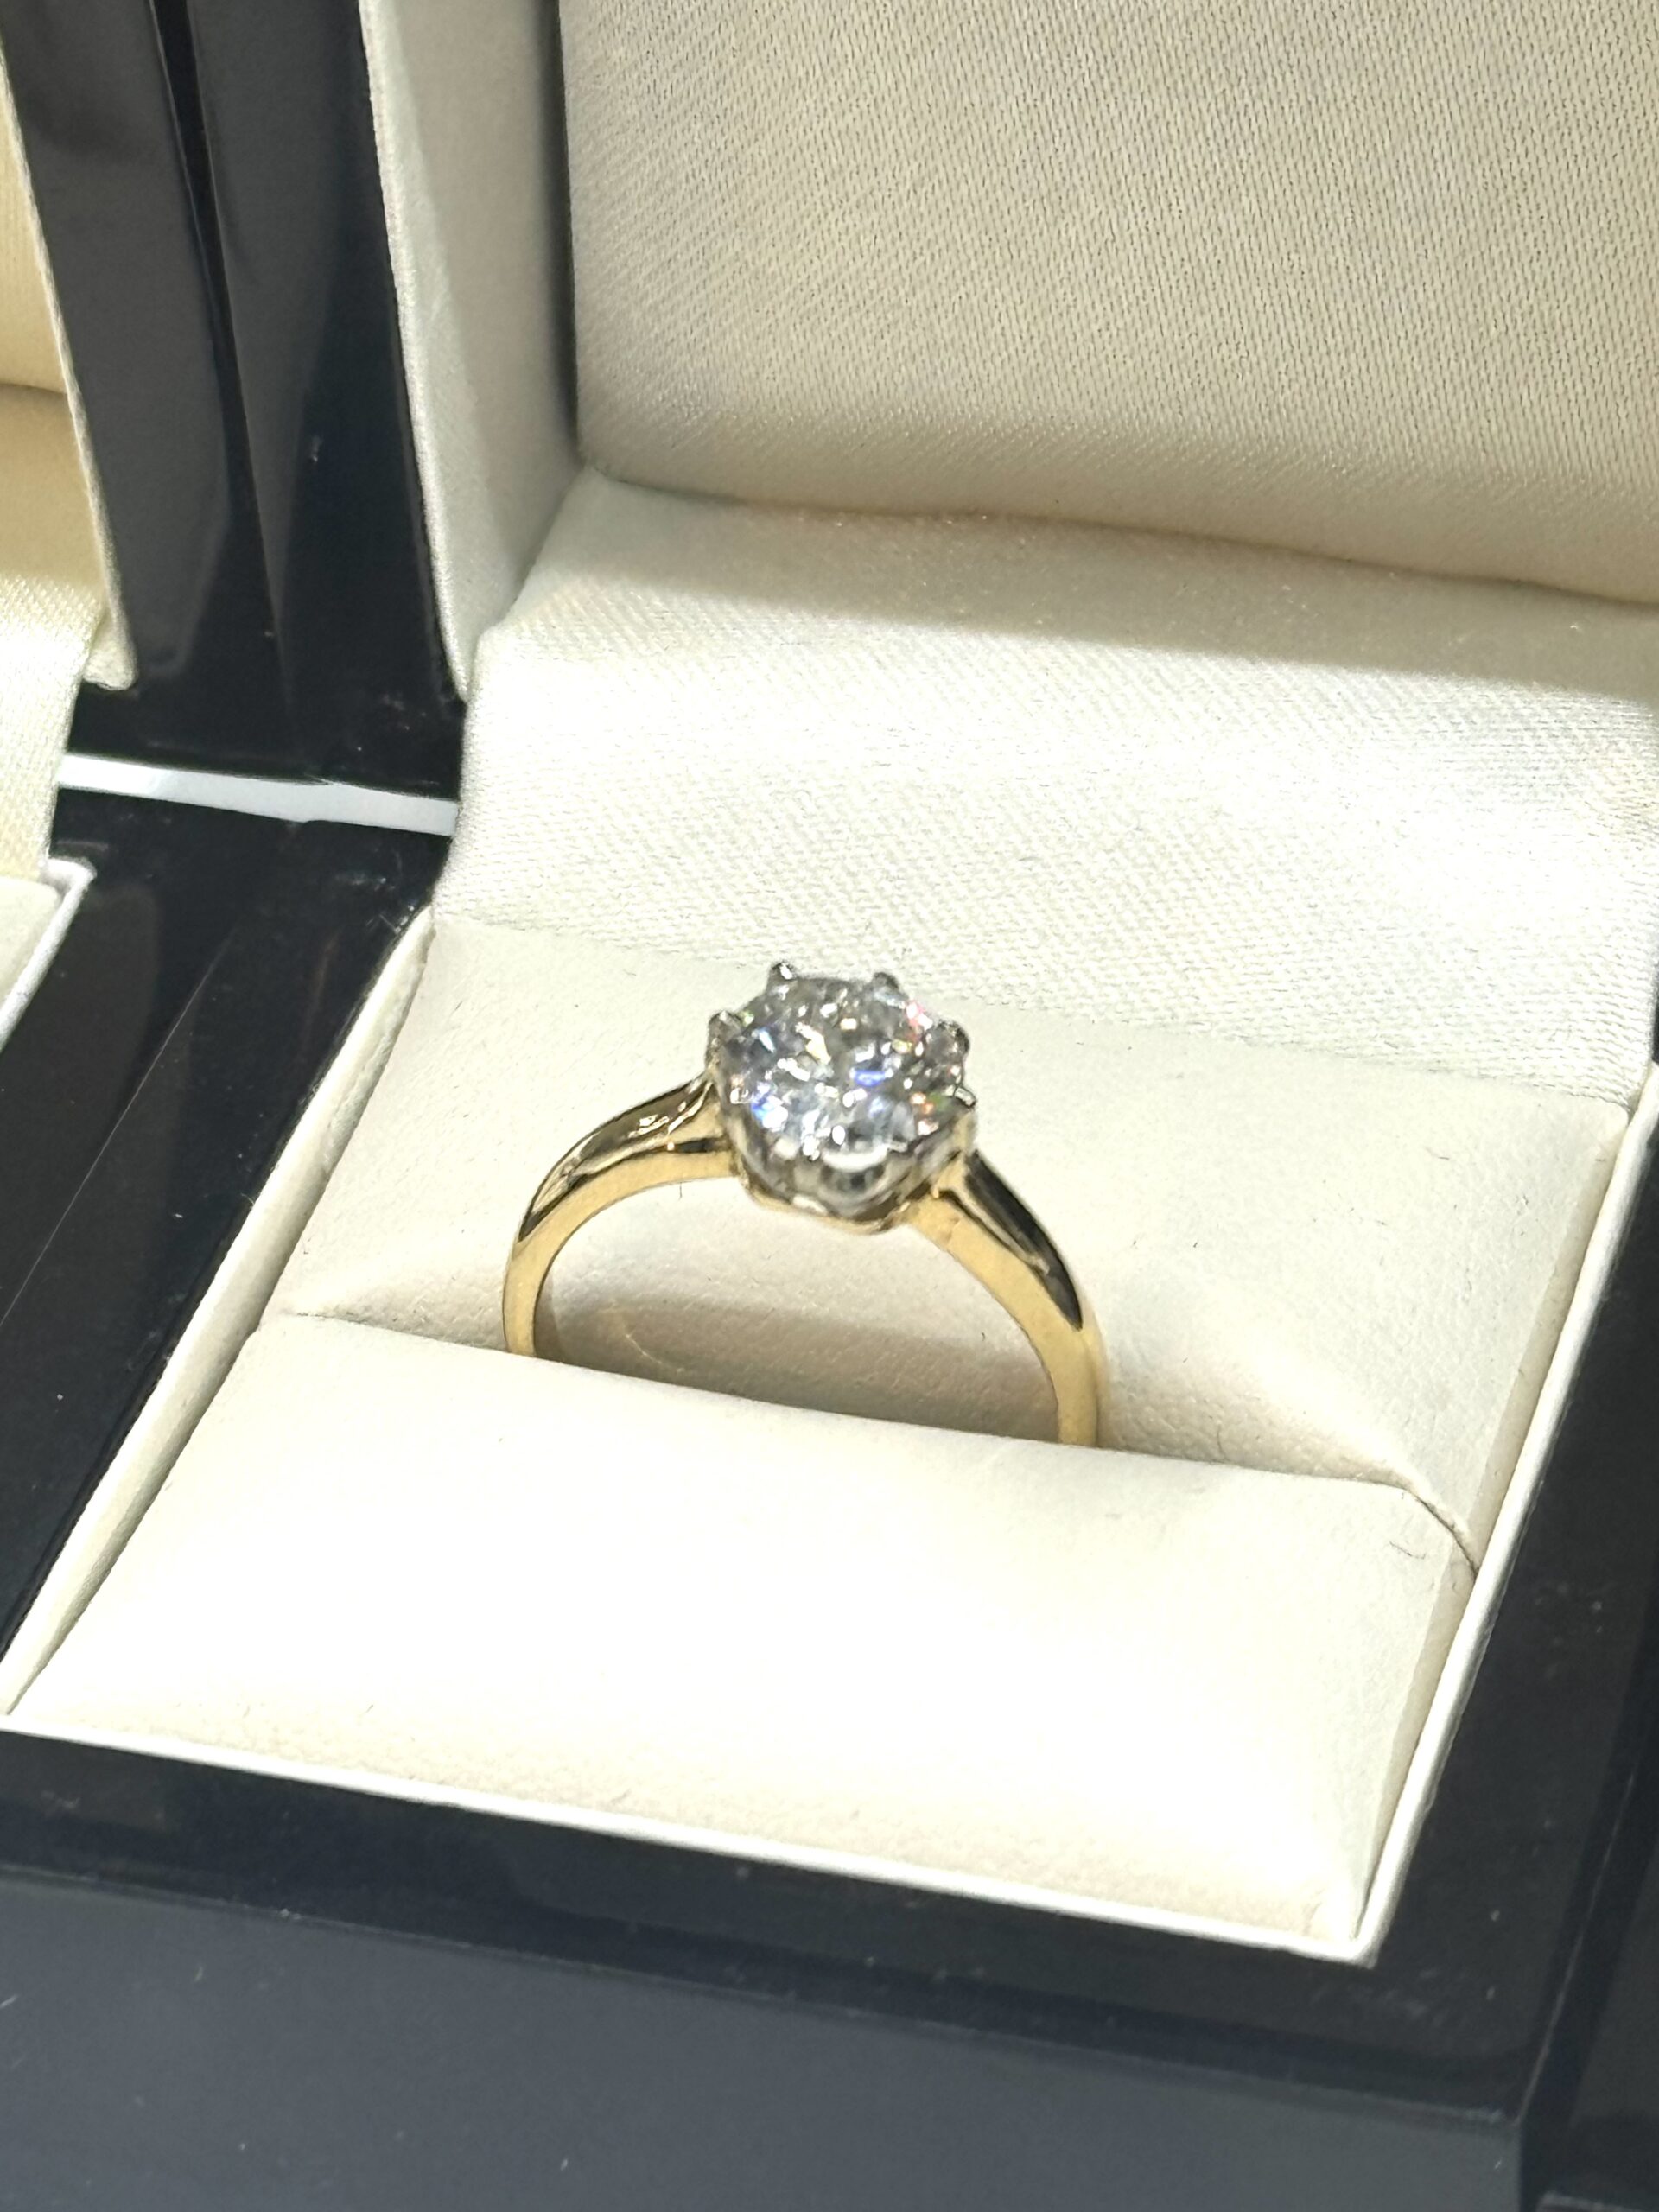 1.8 Carat Diamond Solitaire 18ct Yellow Gold Ring